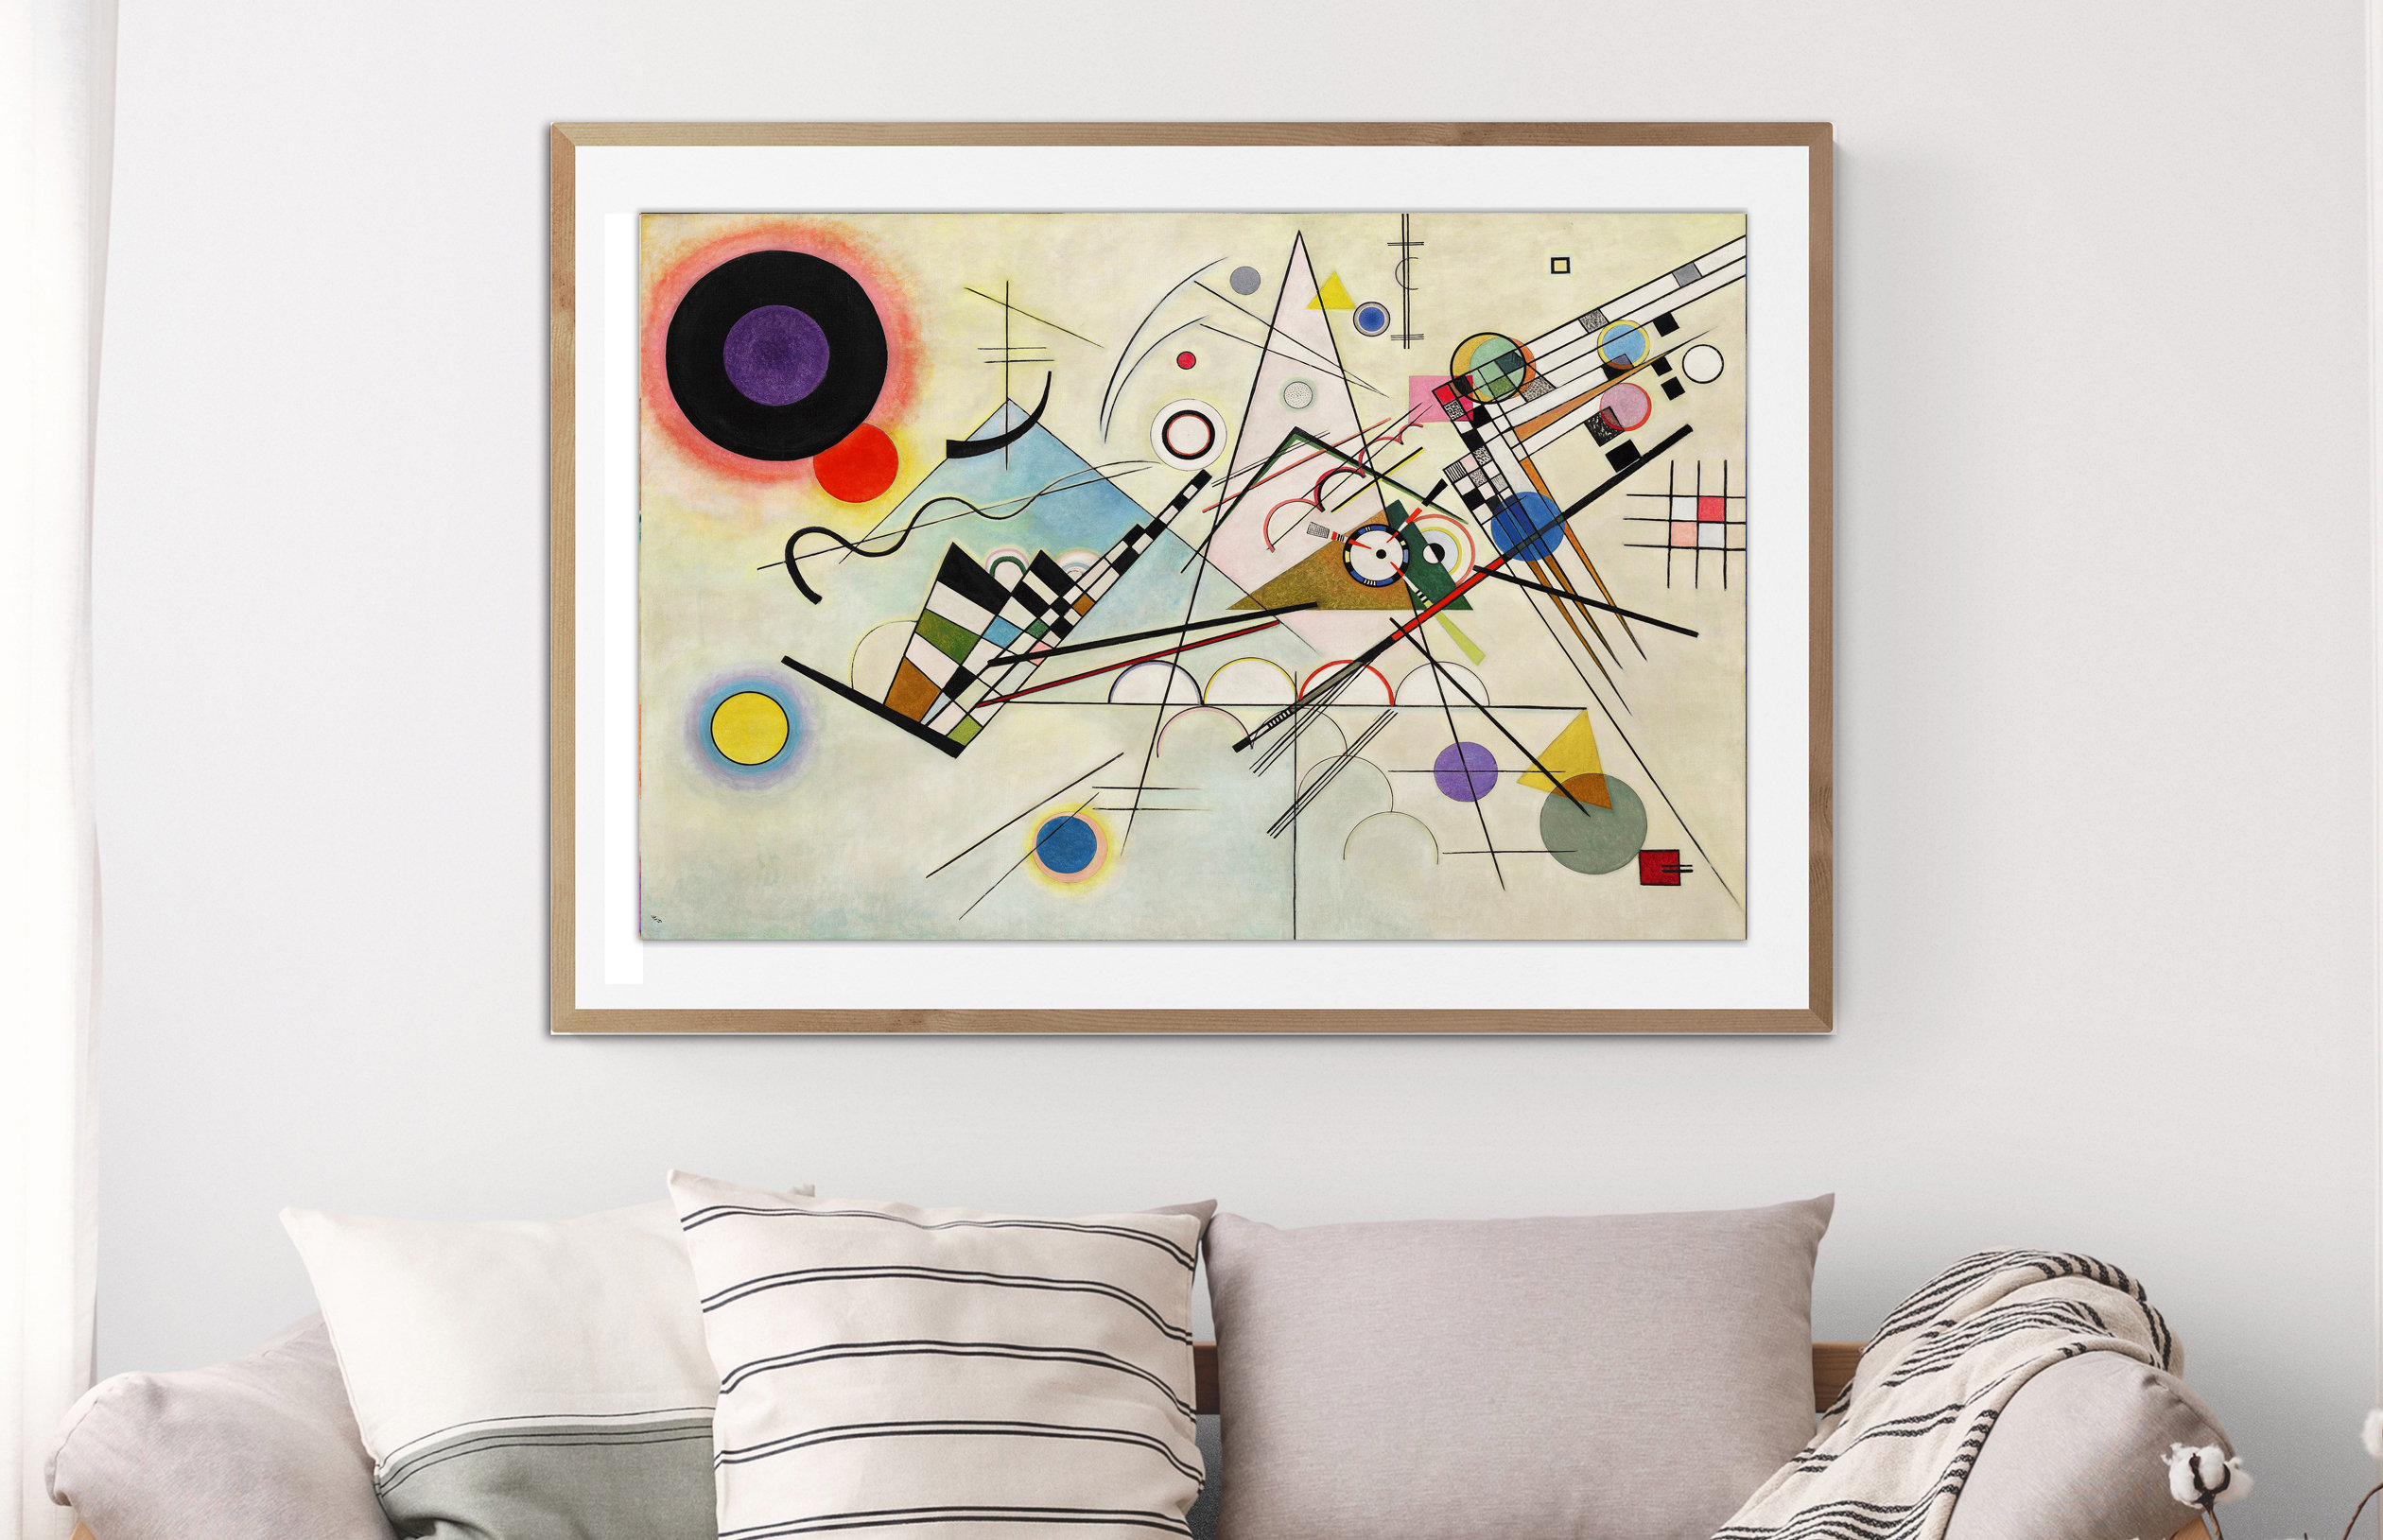 Fine Art Print Modern Artwork Abstract Wall Décor Colorful Wall Art Deepened Impulse by Wassily Kandinsky Expressionist Poster